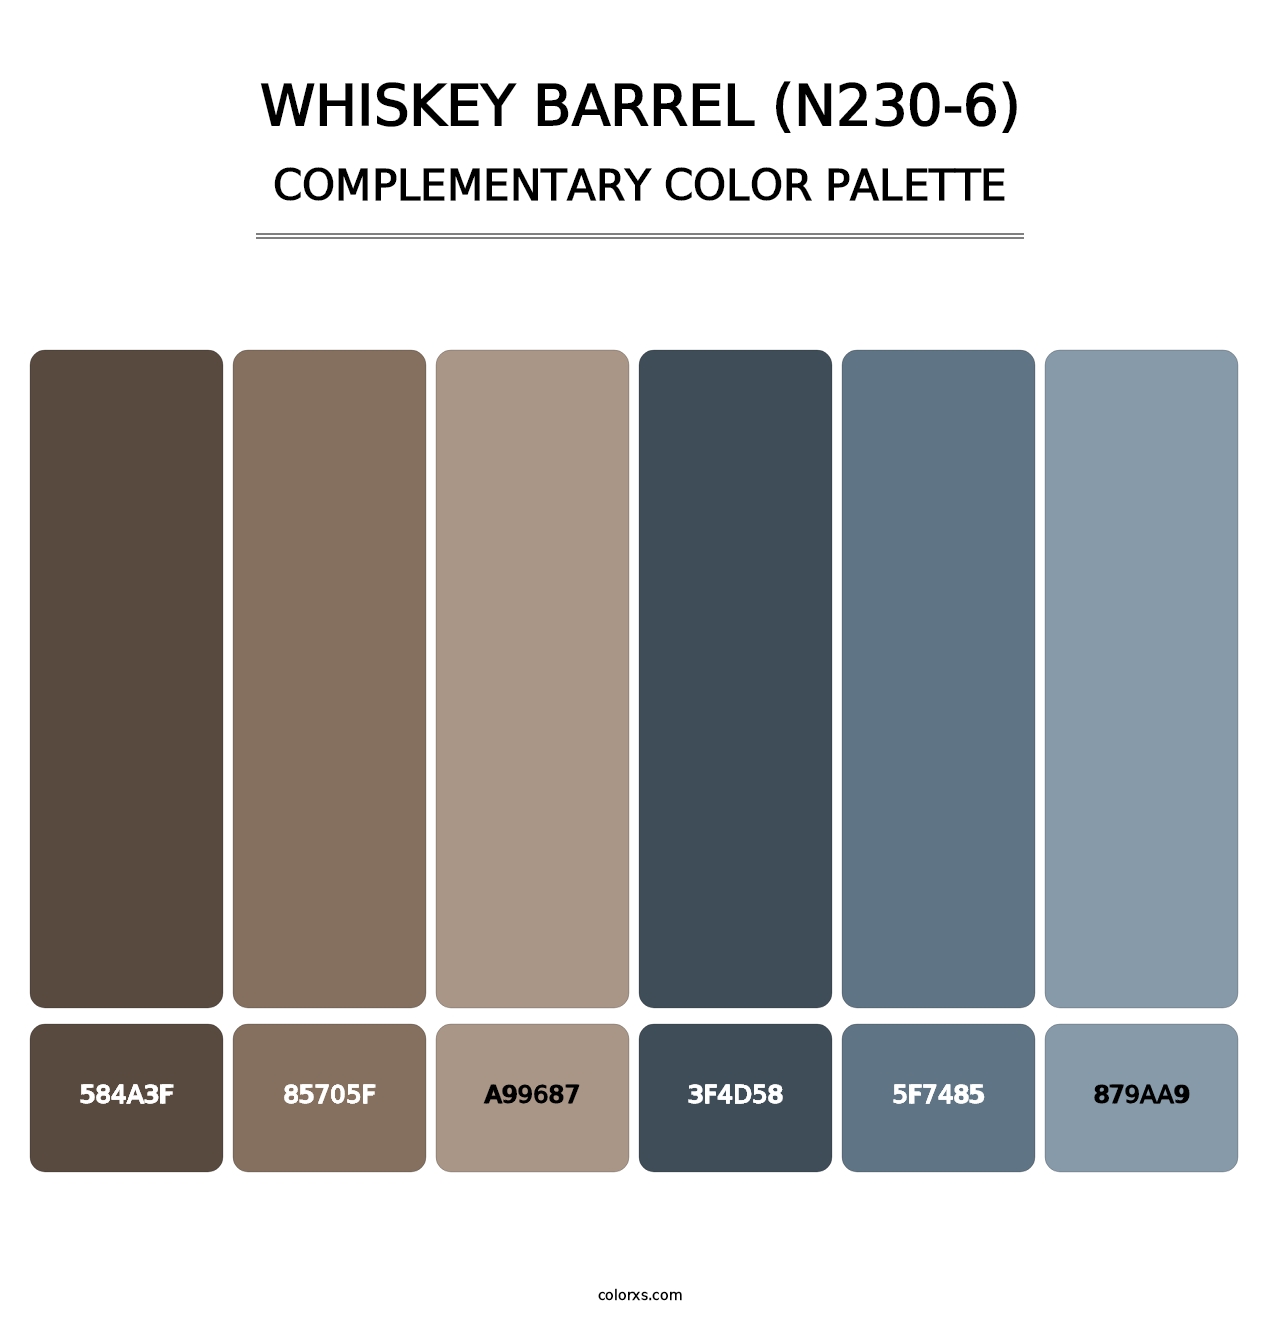 Whiskey Barrel (N230-6) - Complementary Color Palette